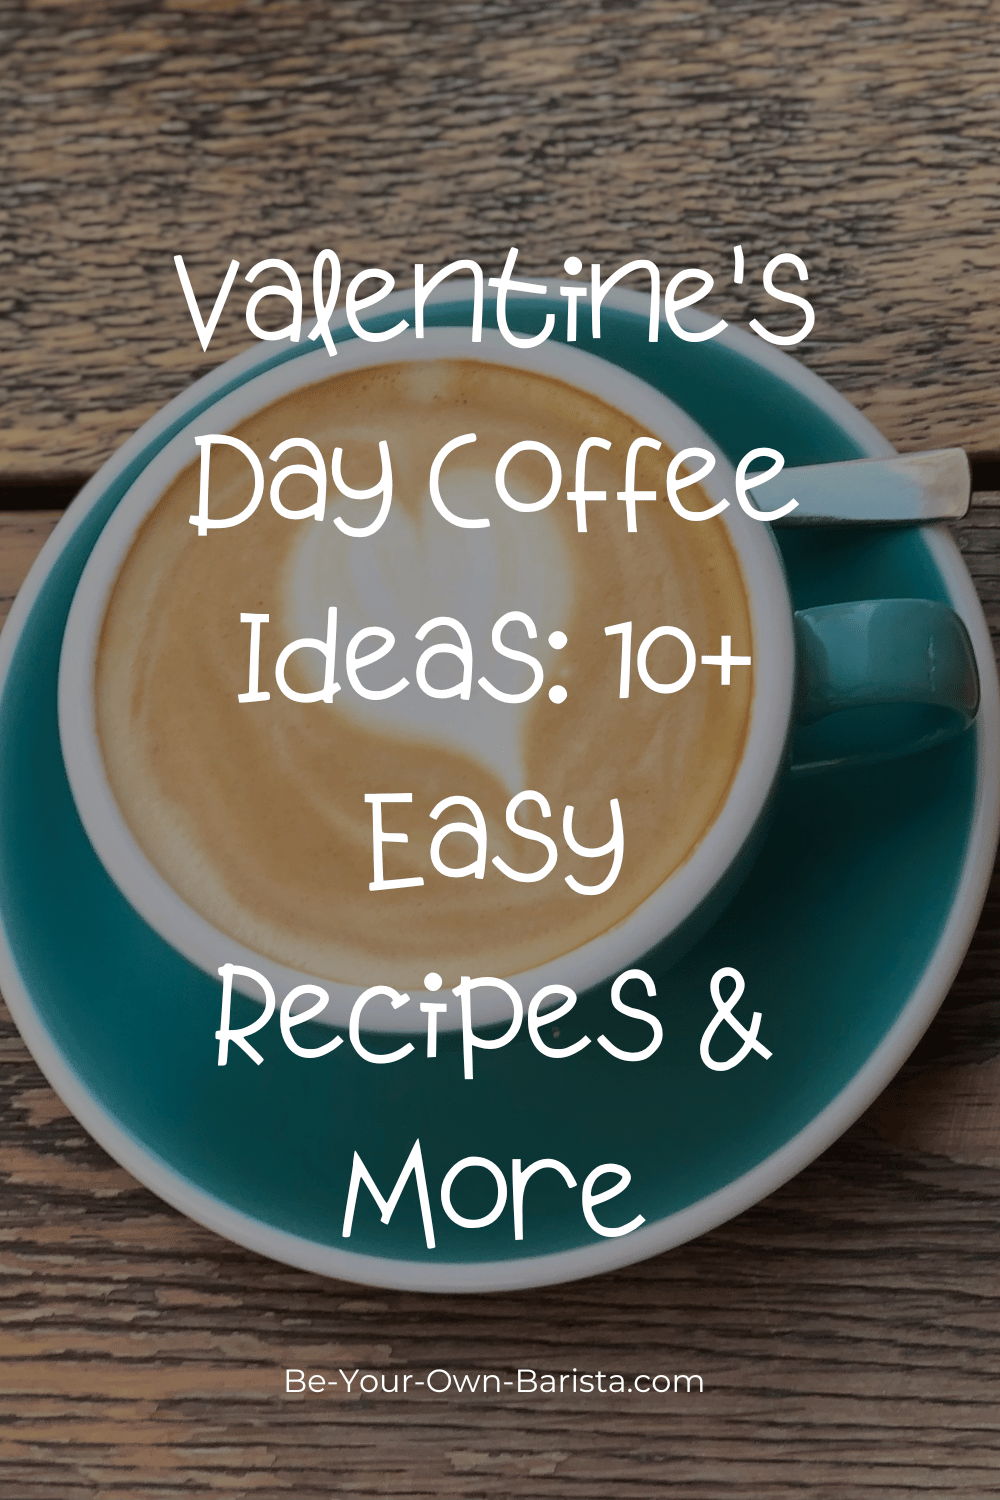 Valentine’s Day Coffee Drink Ideas: 10+ Easy Recipes & More